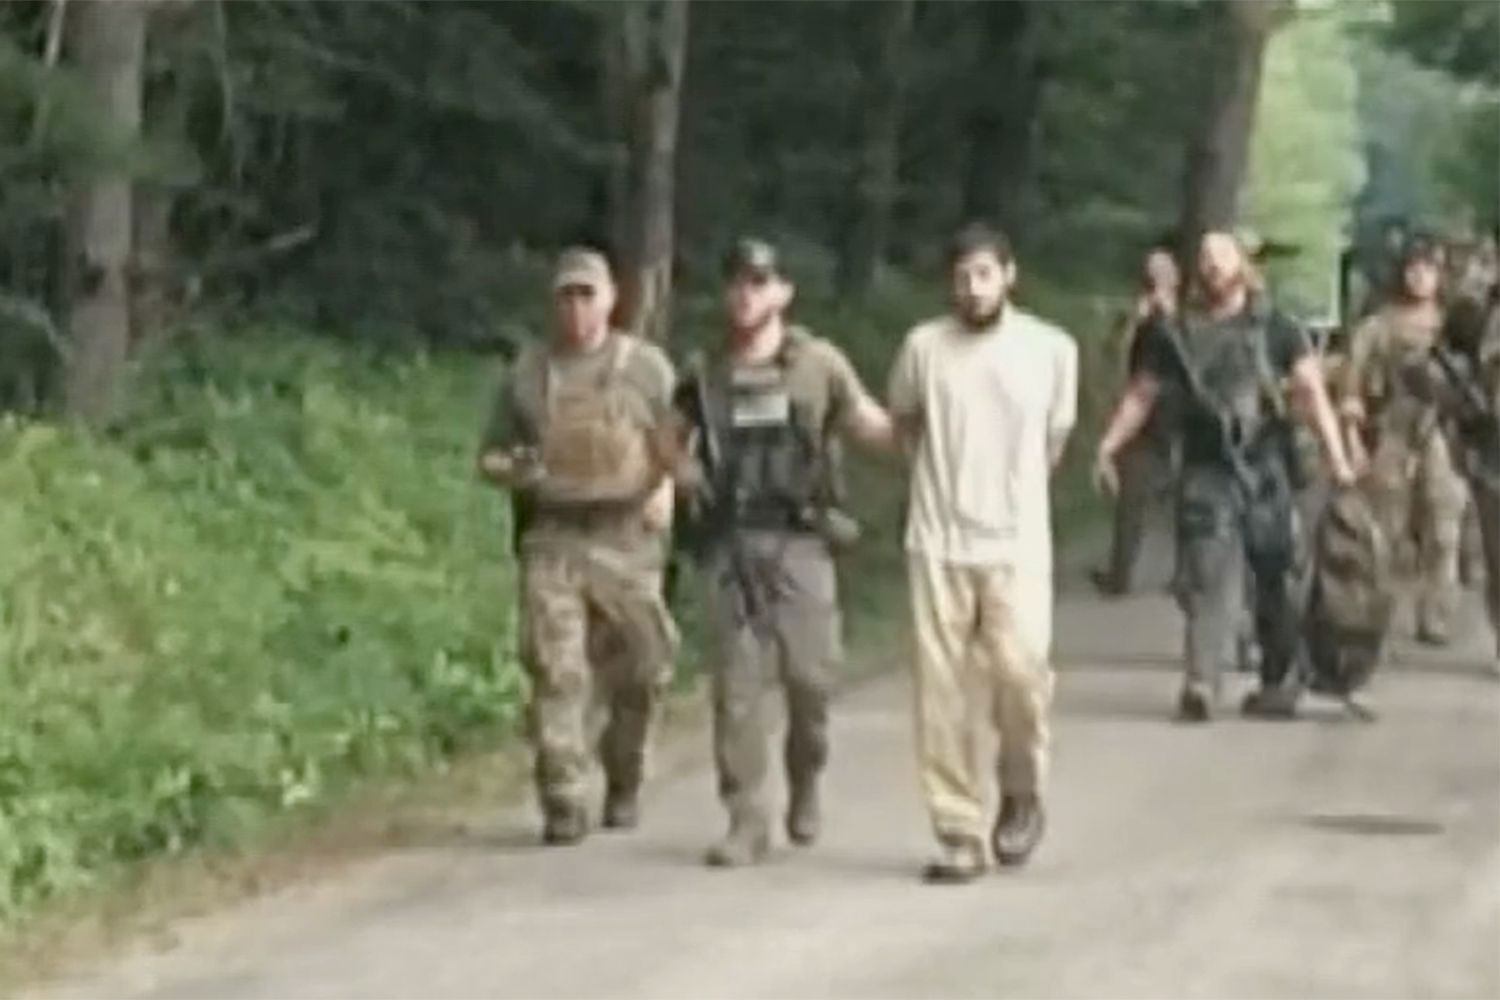 Police Capture Escaped Prison Inmate Who Was On The Run For Over A Week In Pennsylvania